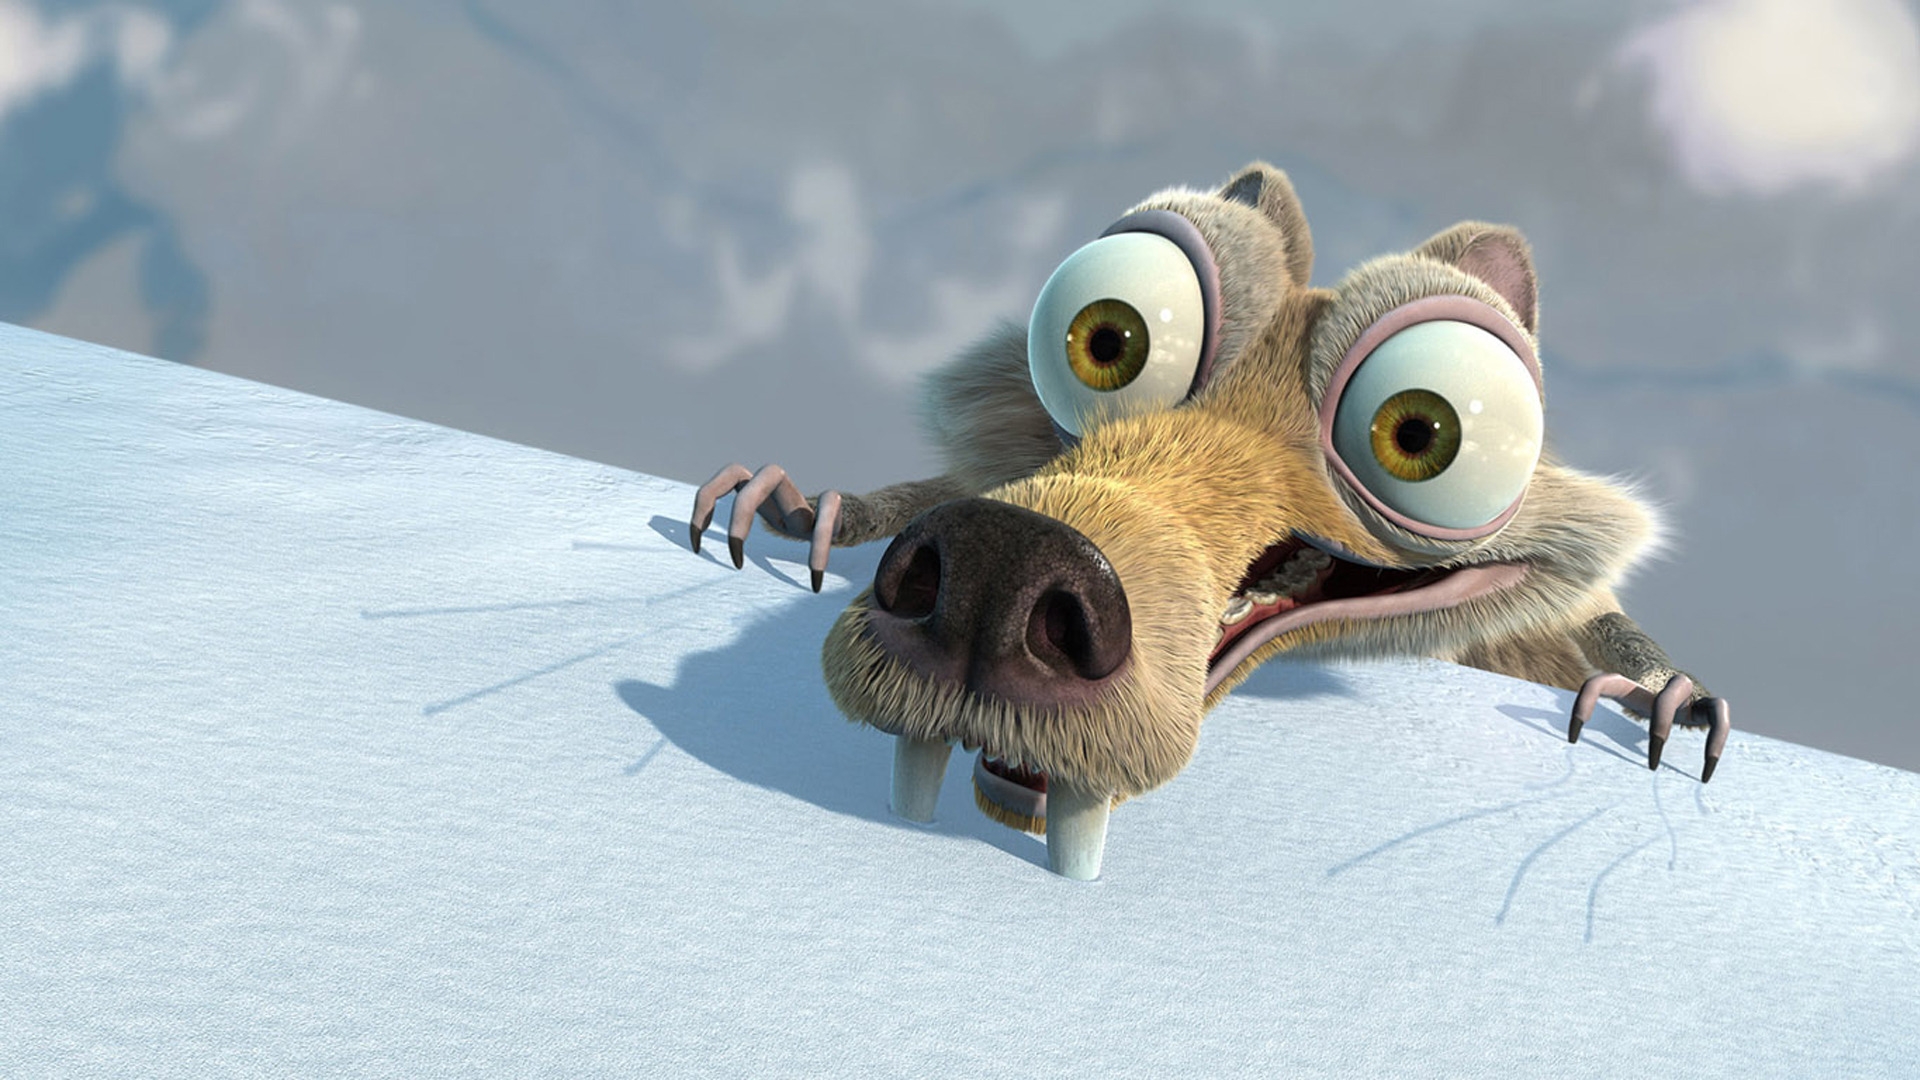 Ice Age Scrat for 1920 x 1080 HDTV 1080p resolution